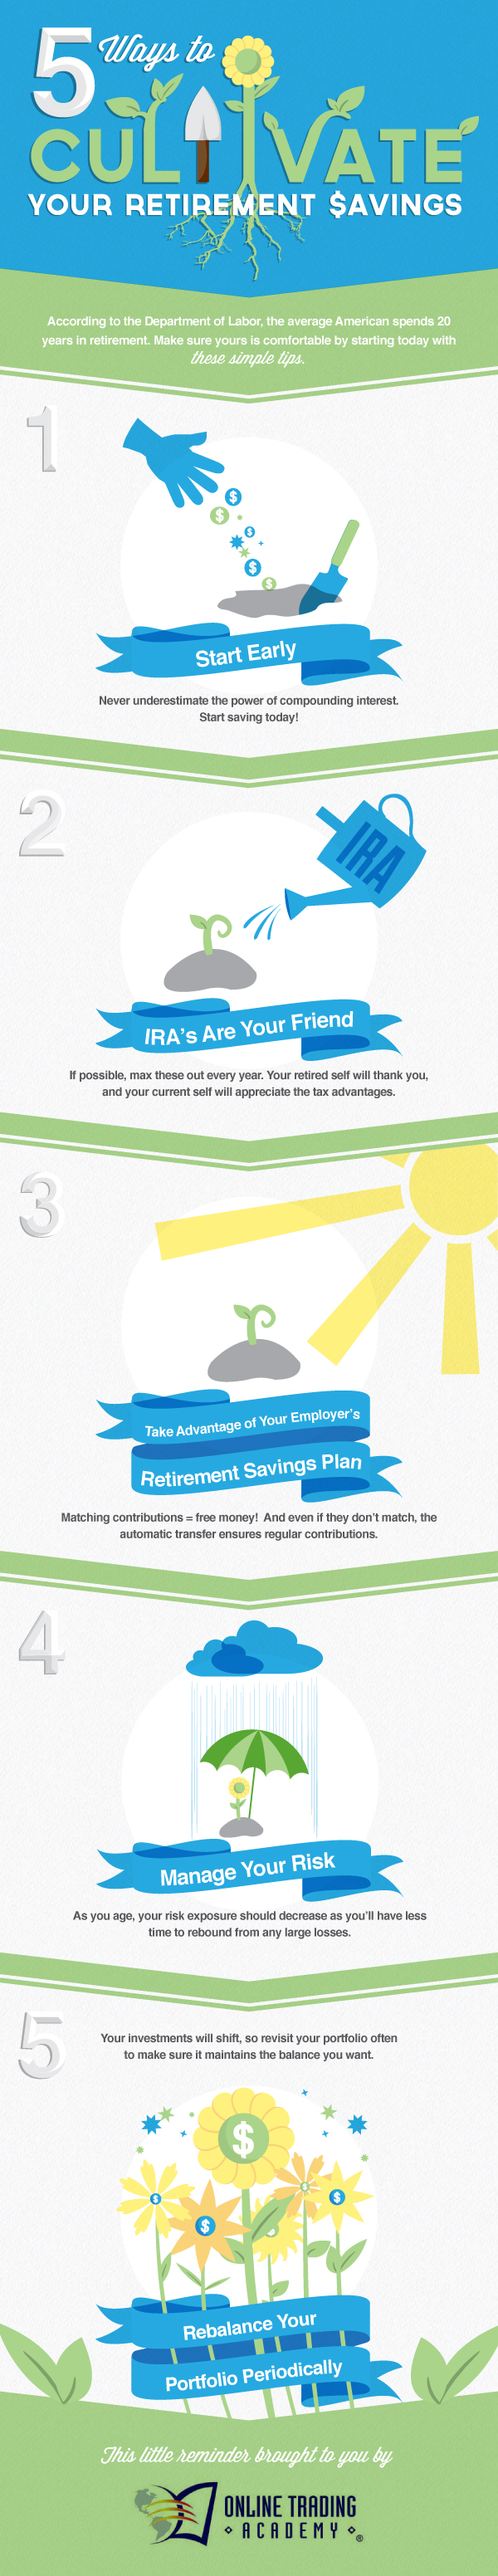 Graphic with 5 Ways to Save for Retirement